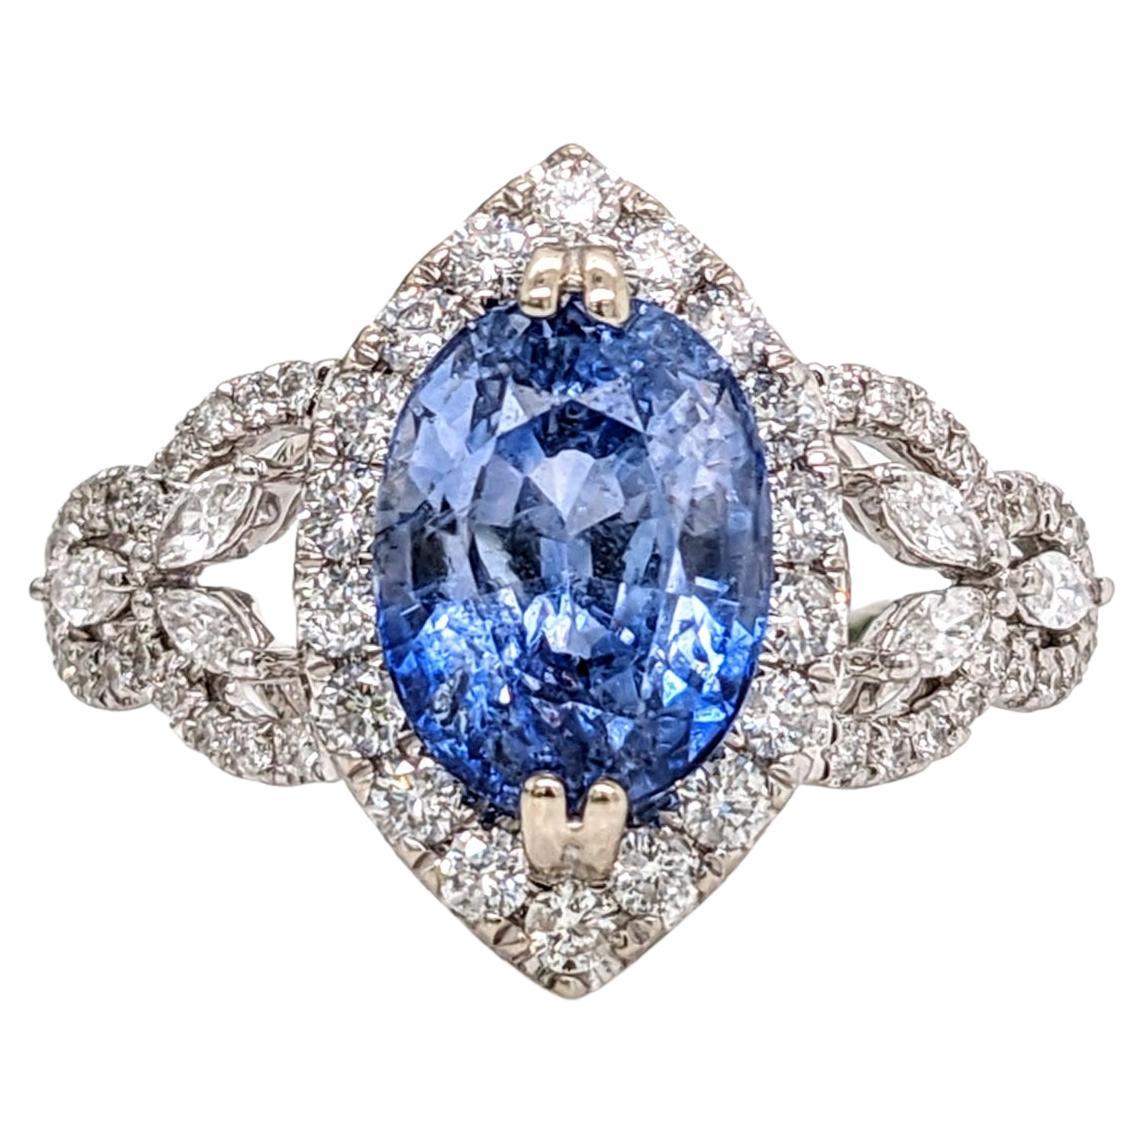 Earth Mined 3.64ct Ceylon Sapphire Ring in 14K White Gold w Diamond Accents